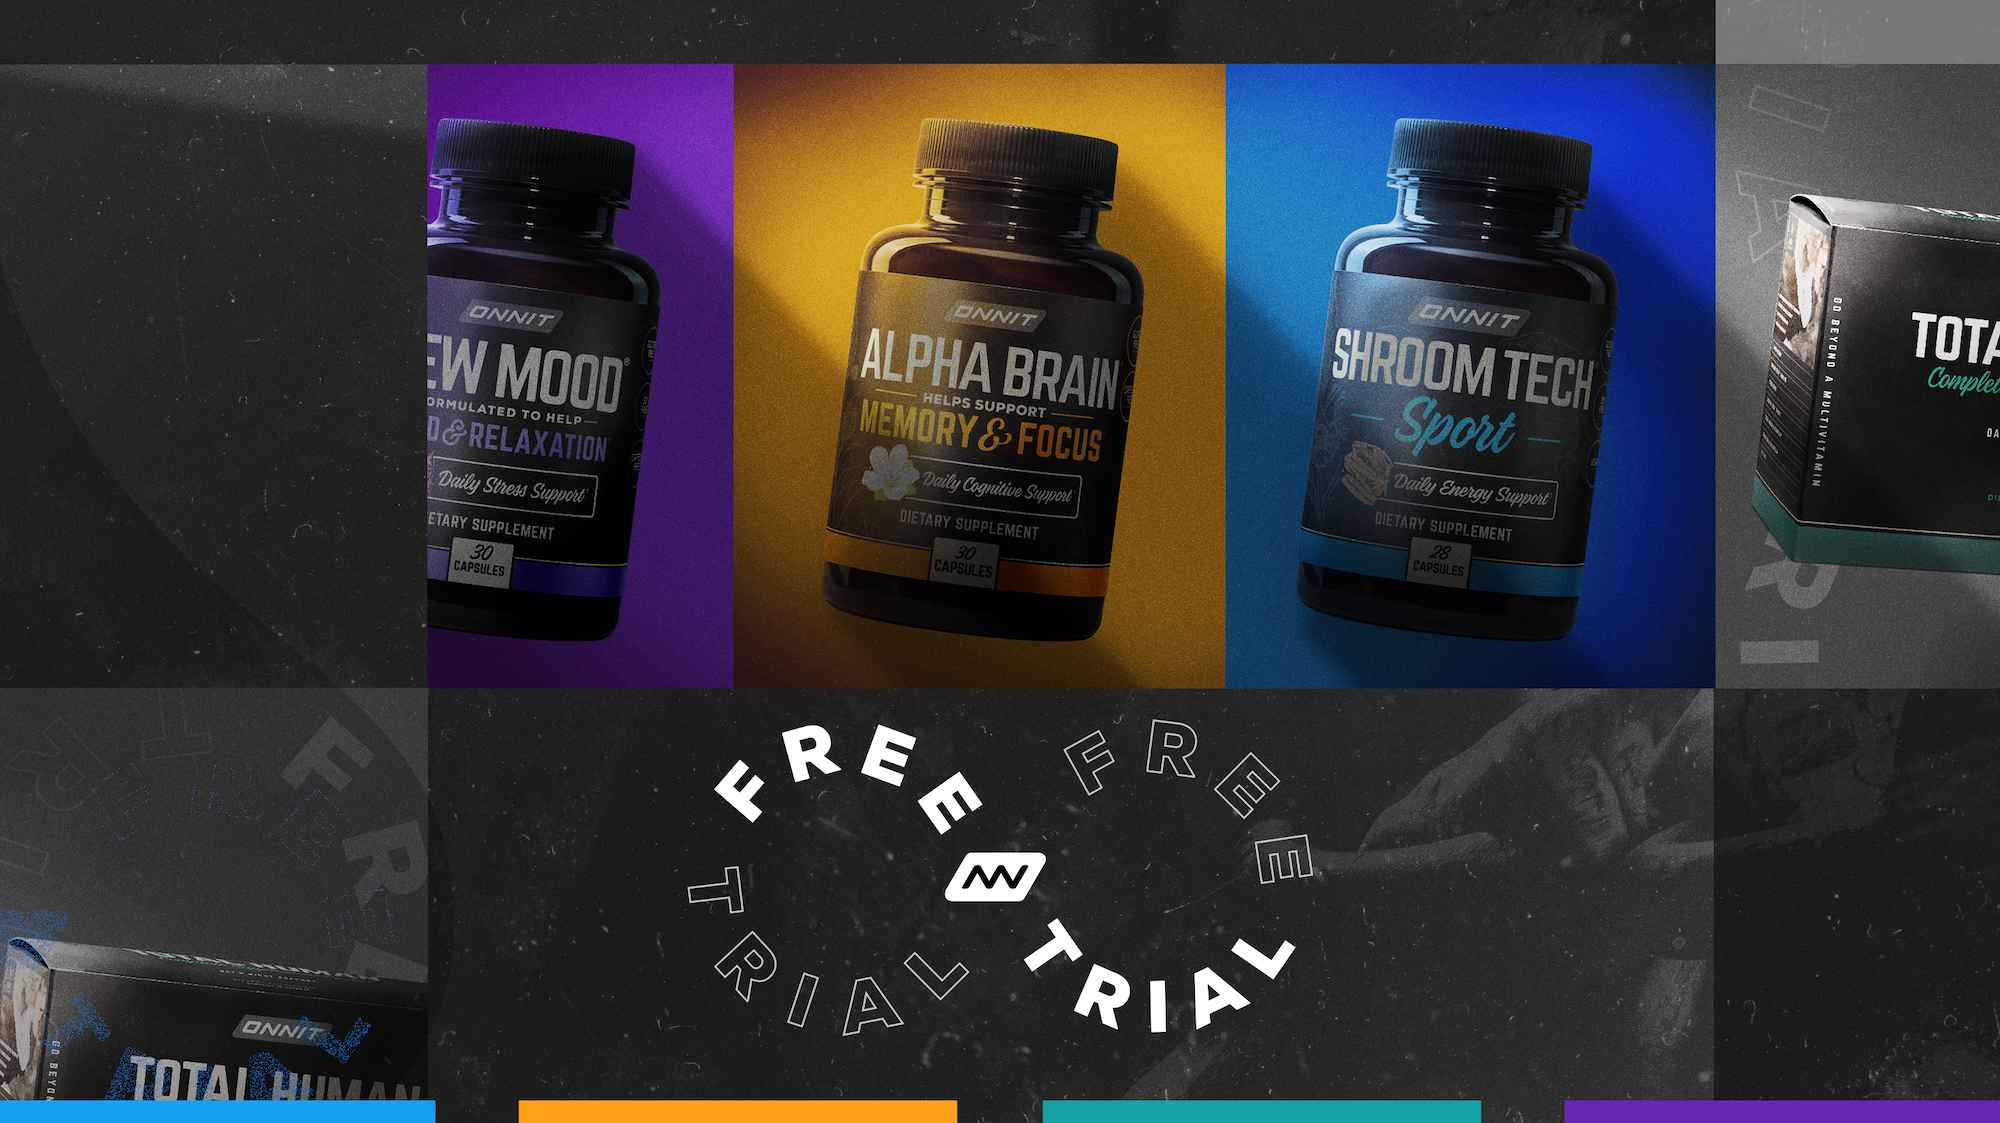 Onnit on X: Introducing the Alpha BRAIN® Collection - Every Alpha